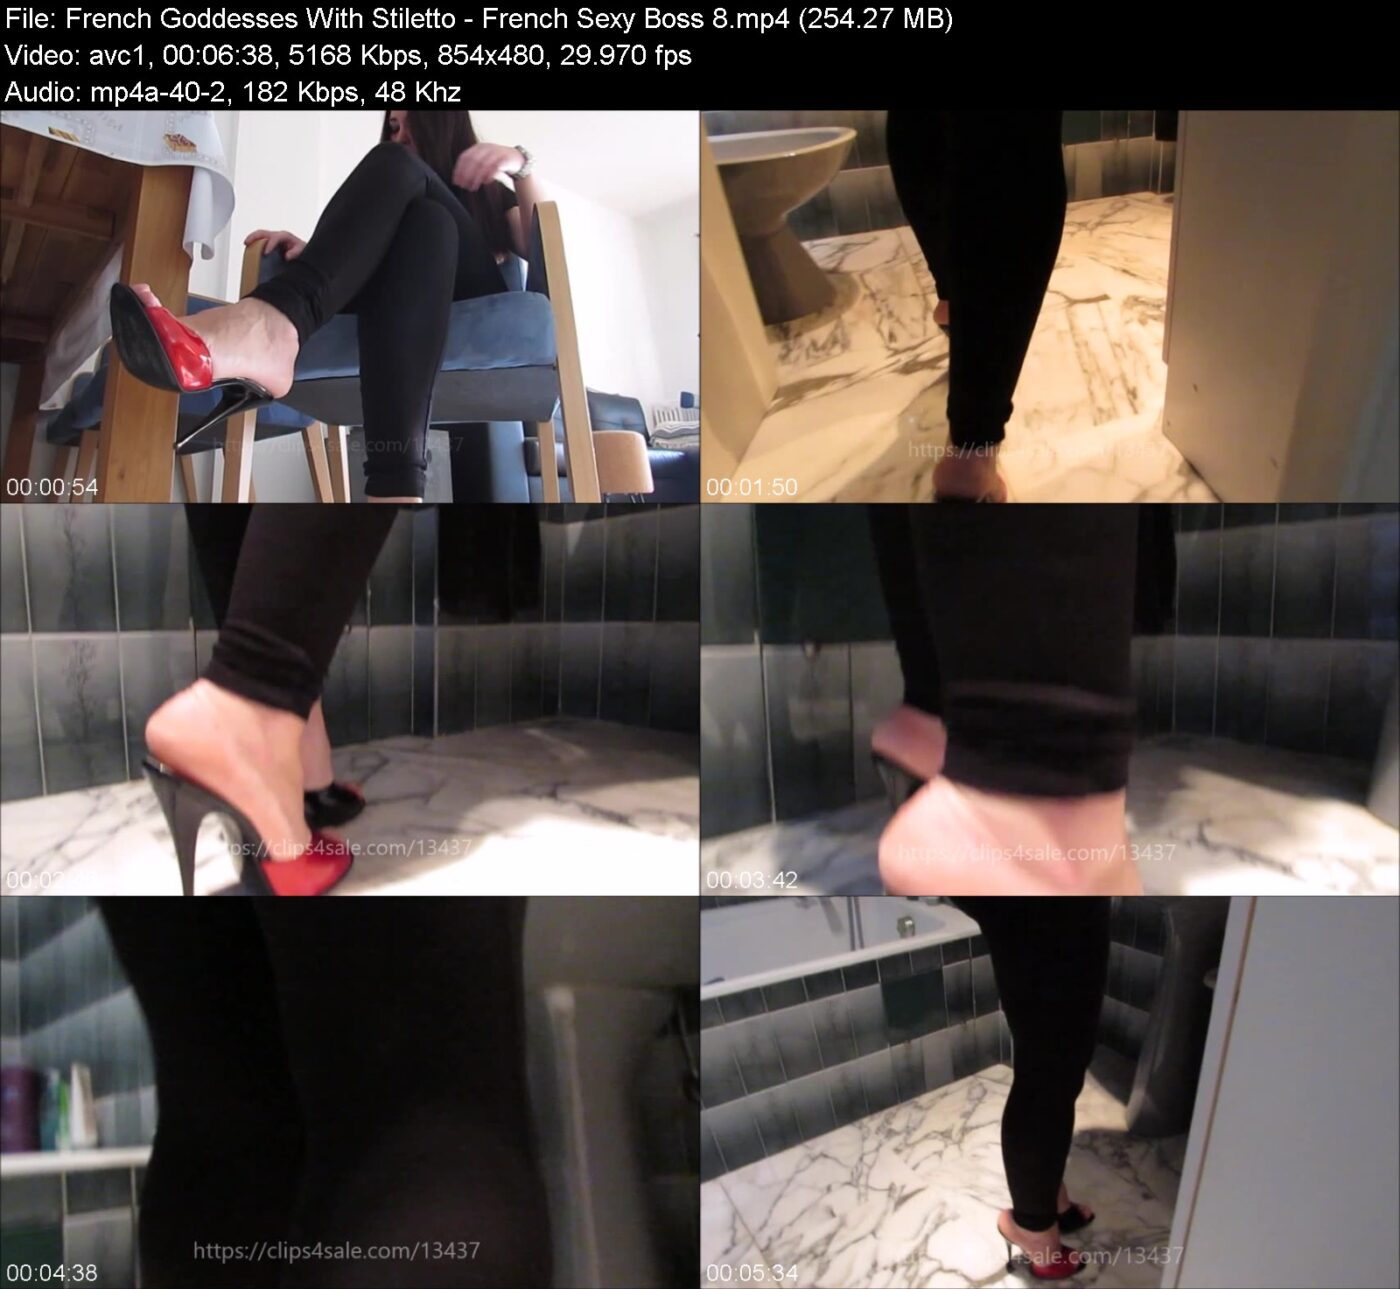 French Goddesses With Stiletto - French Sexy Boss 8